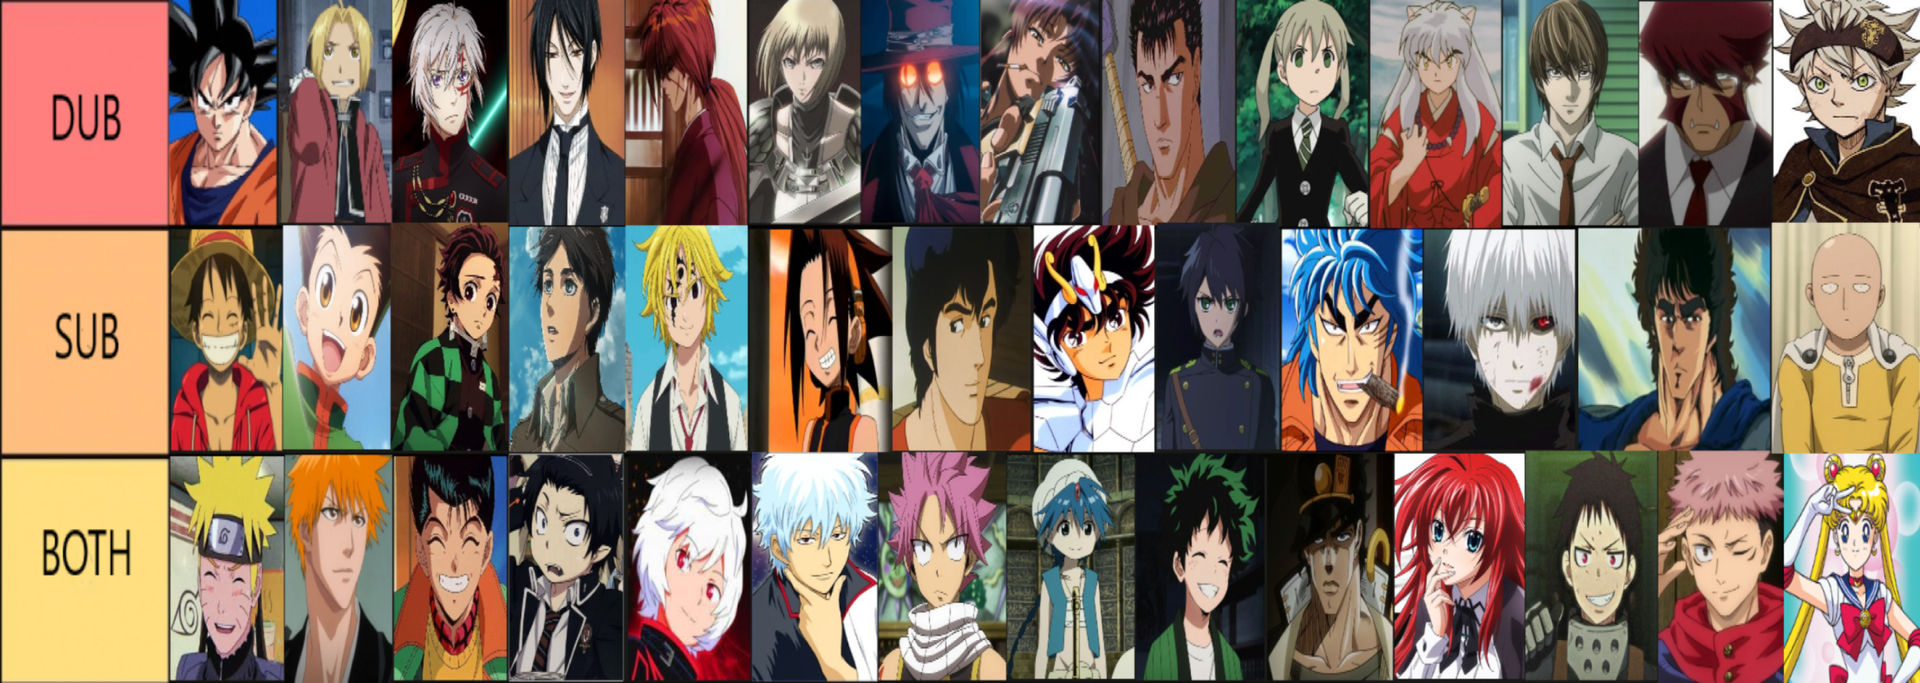 Anime Protagonists Voice Tier List by McHistory on DeviantArt